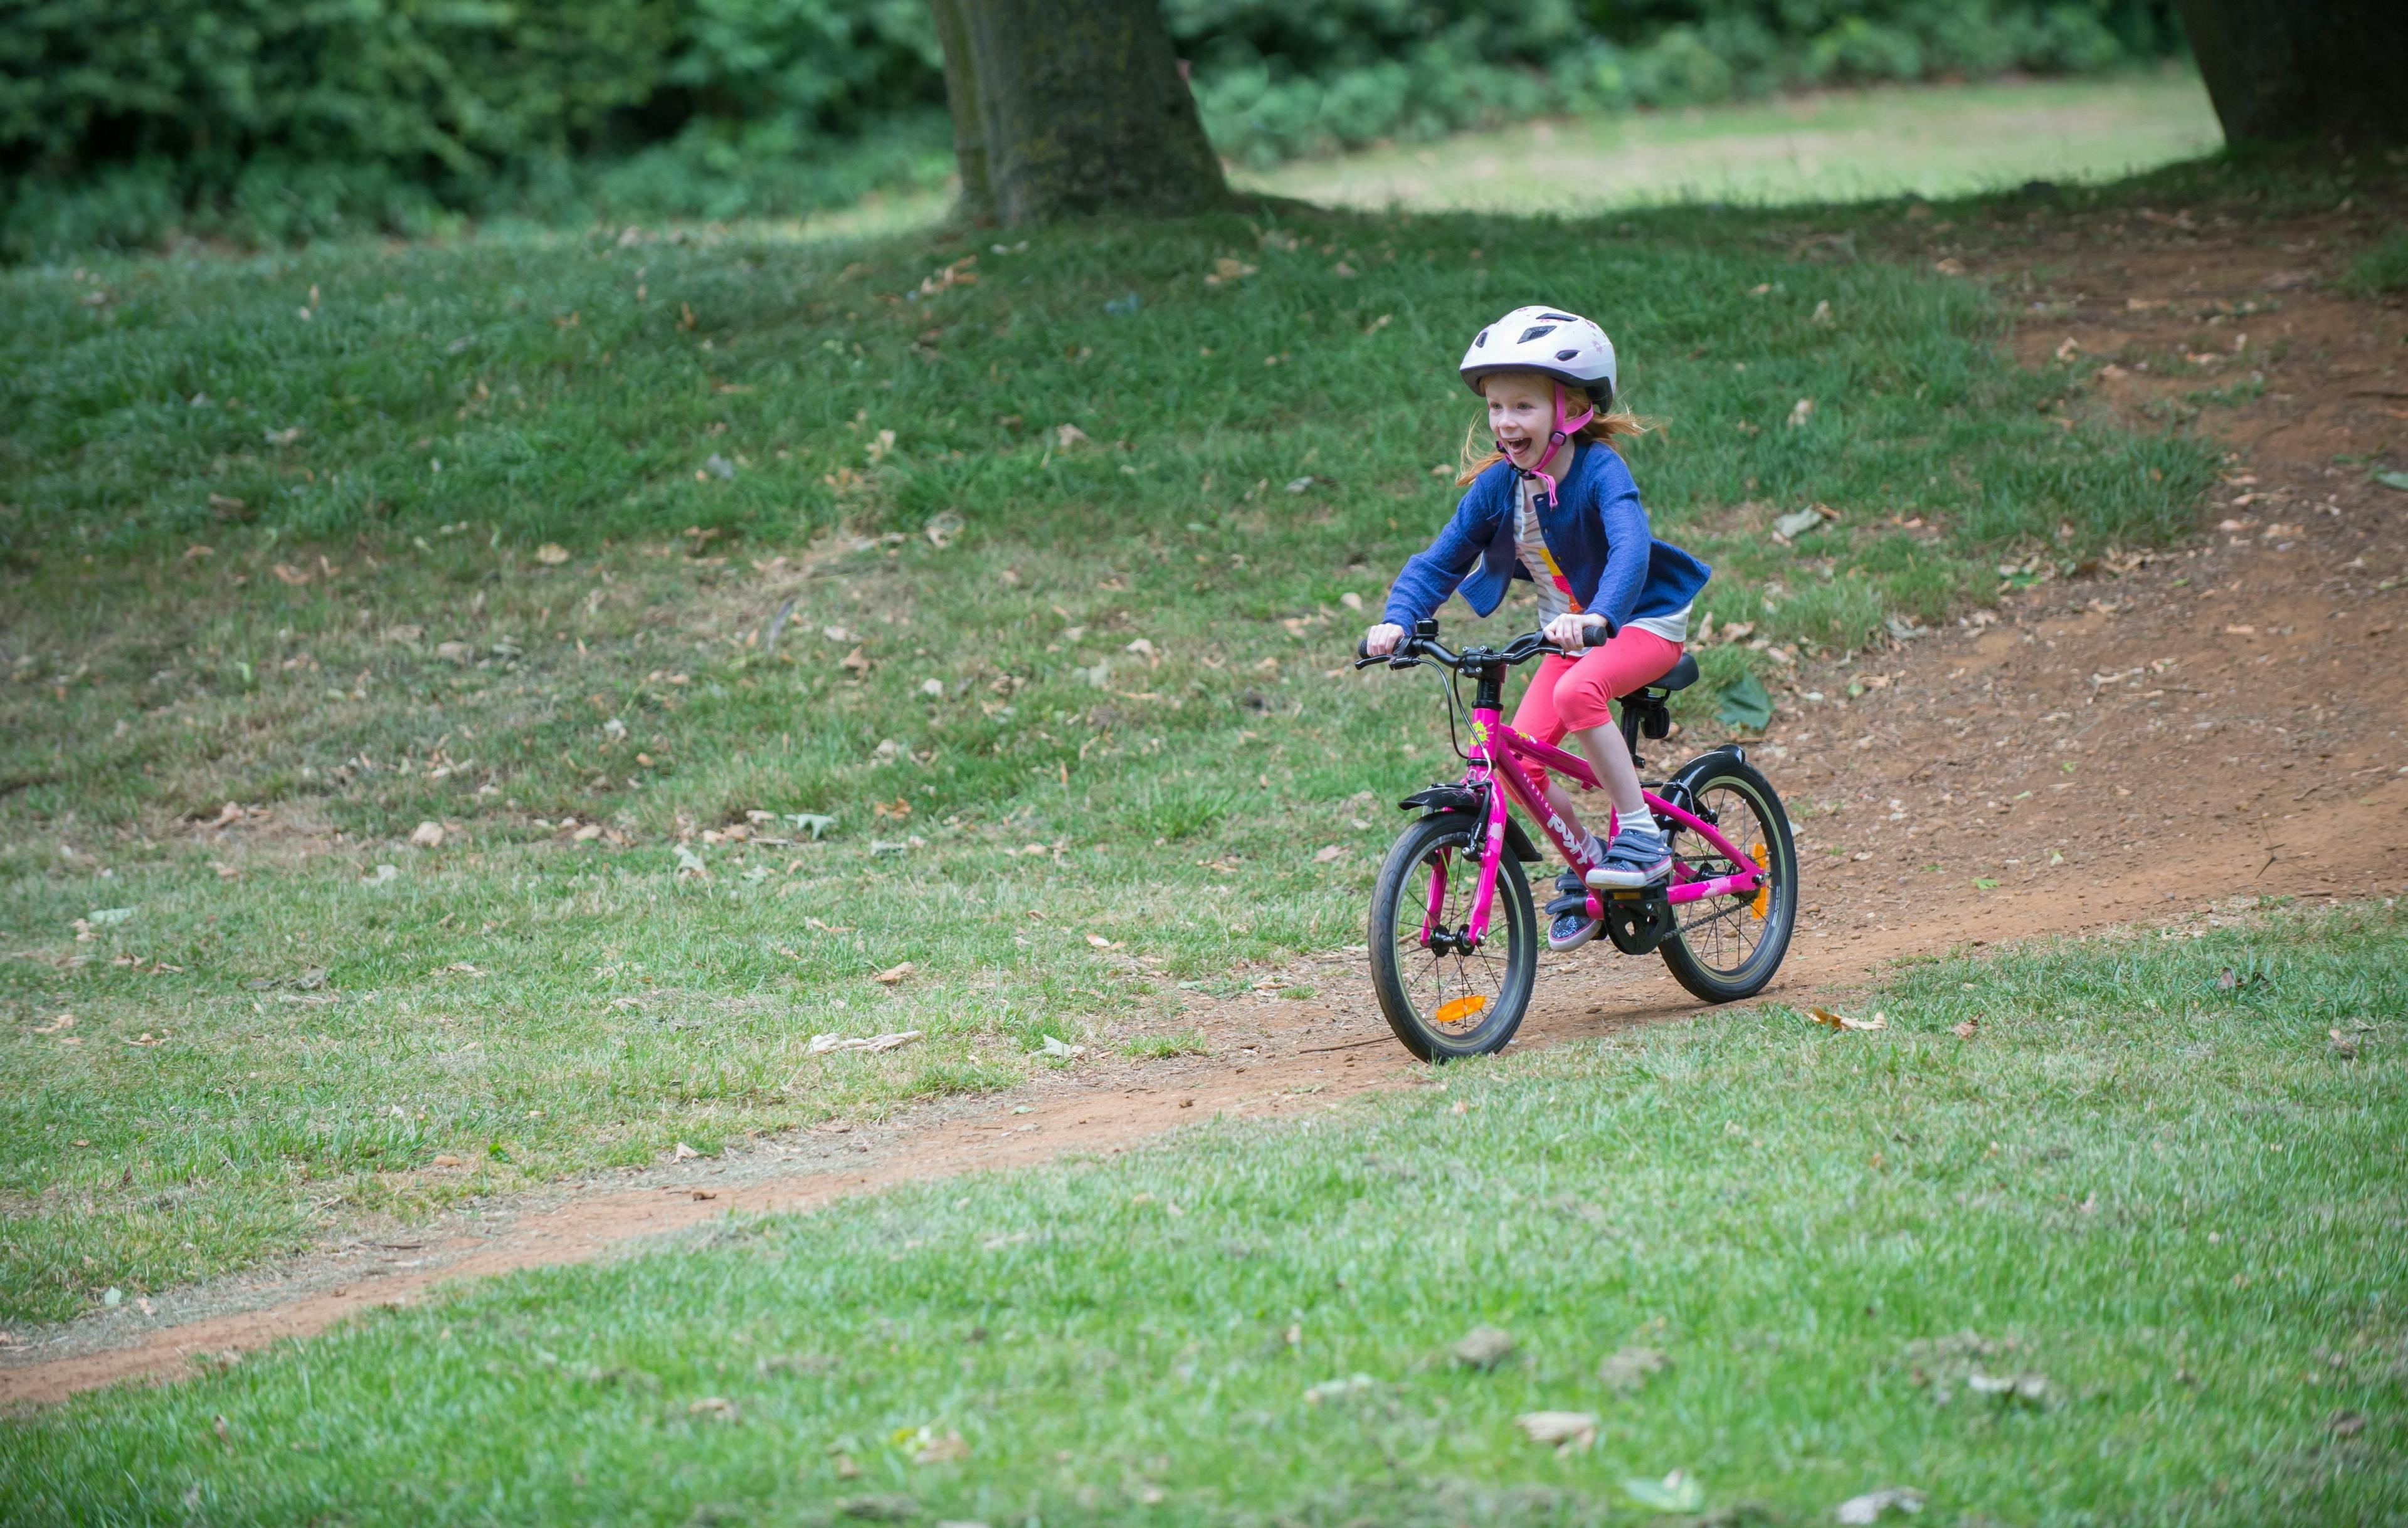 Young girl cycling through a field on a pink bicycle